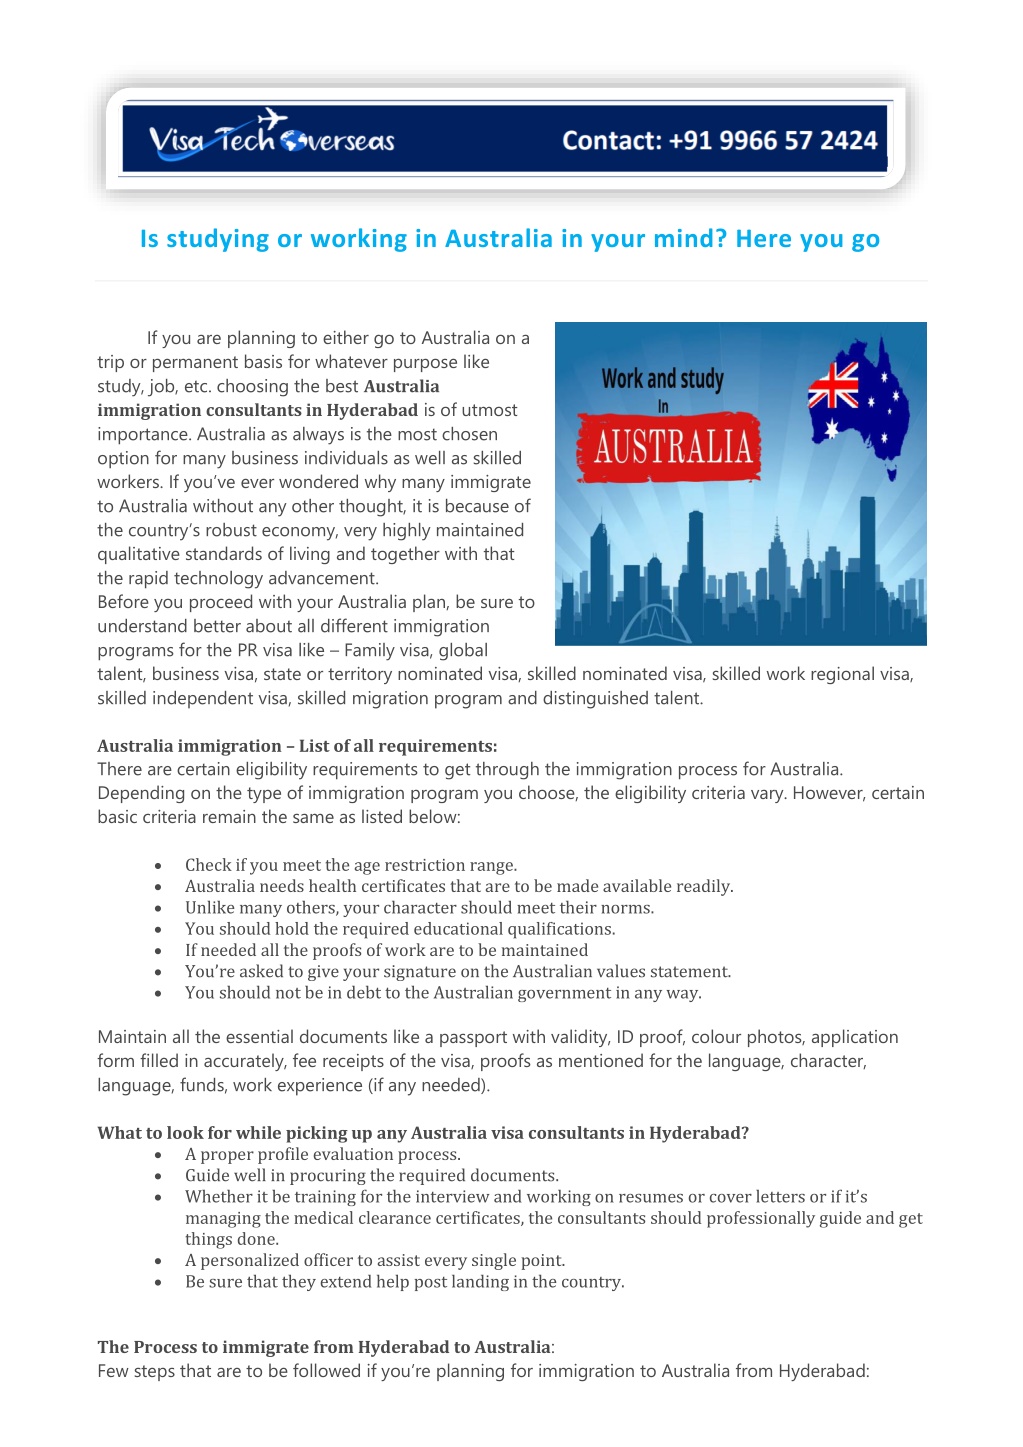 is studying or working in australia in your mind l.w